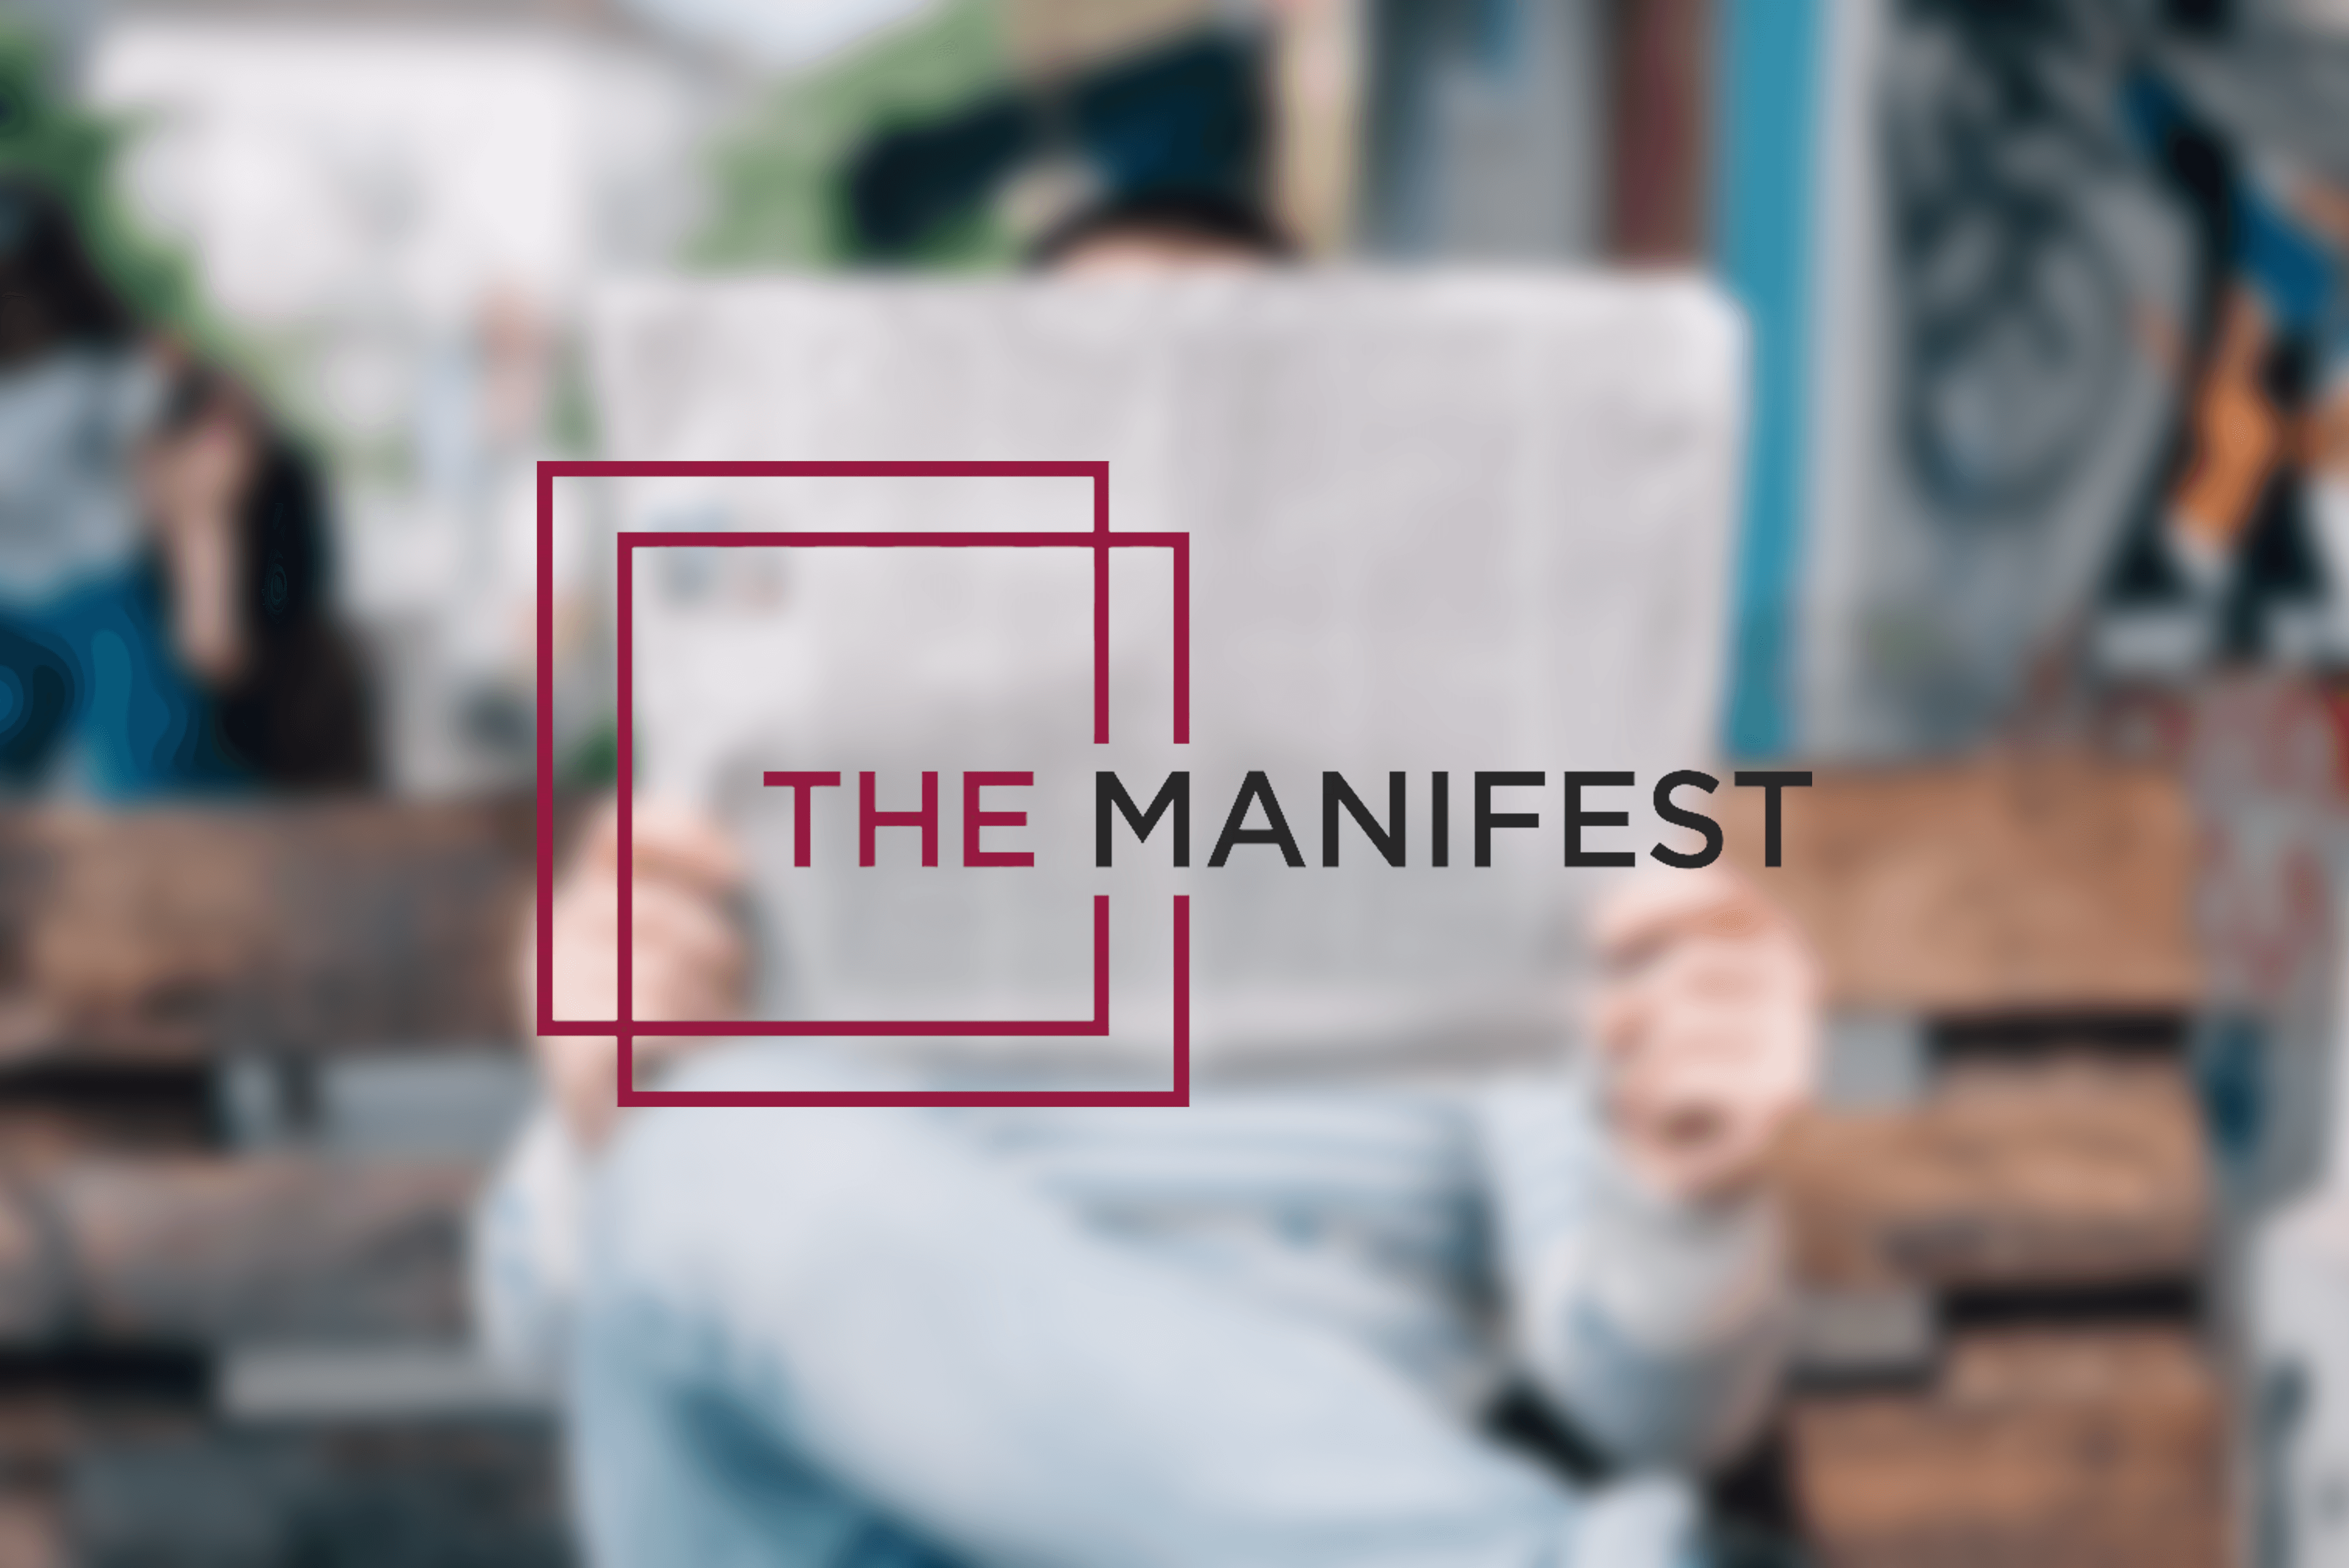 WEBO Digital featured on The Manifest as a top B2B provider